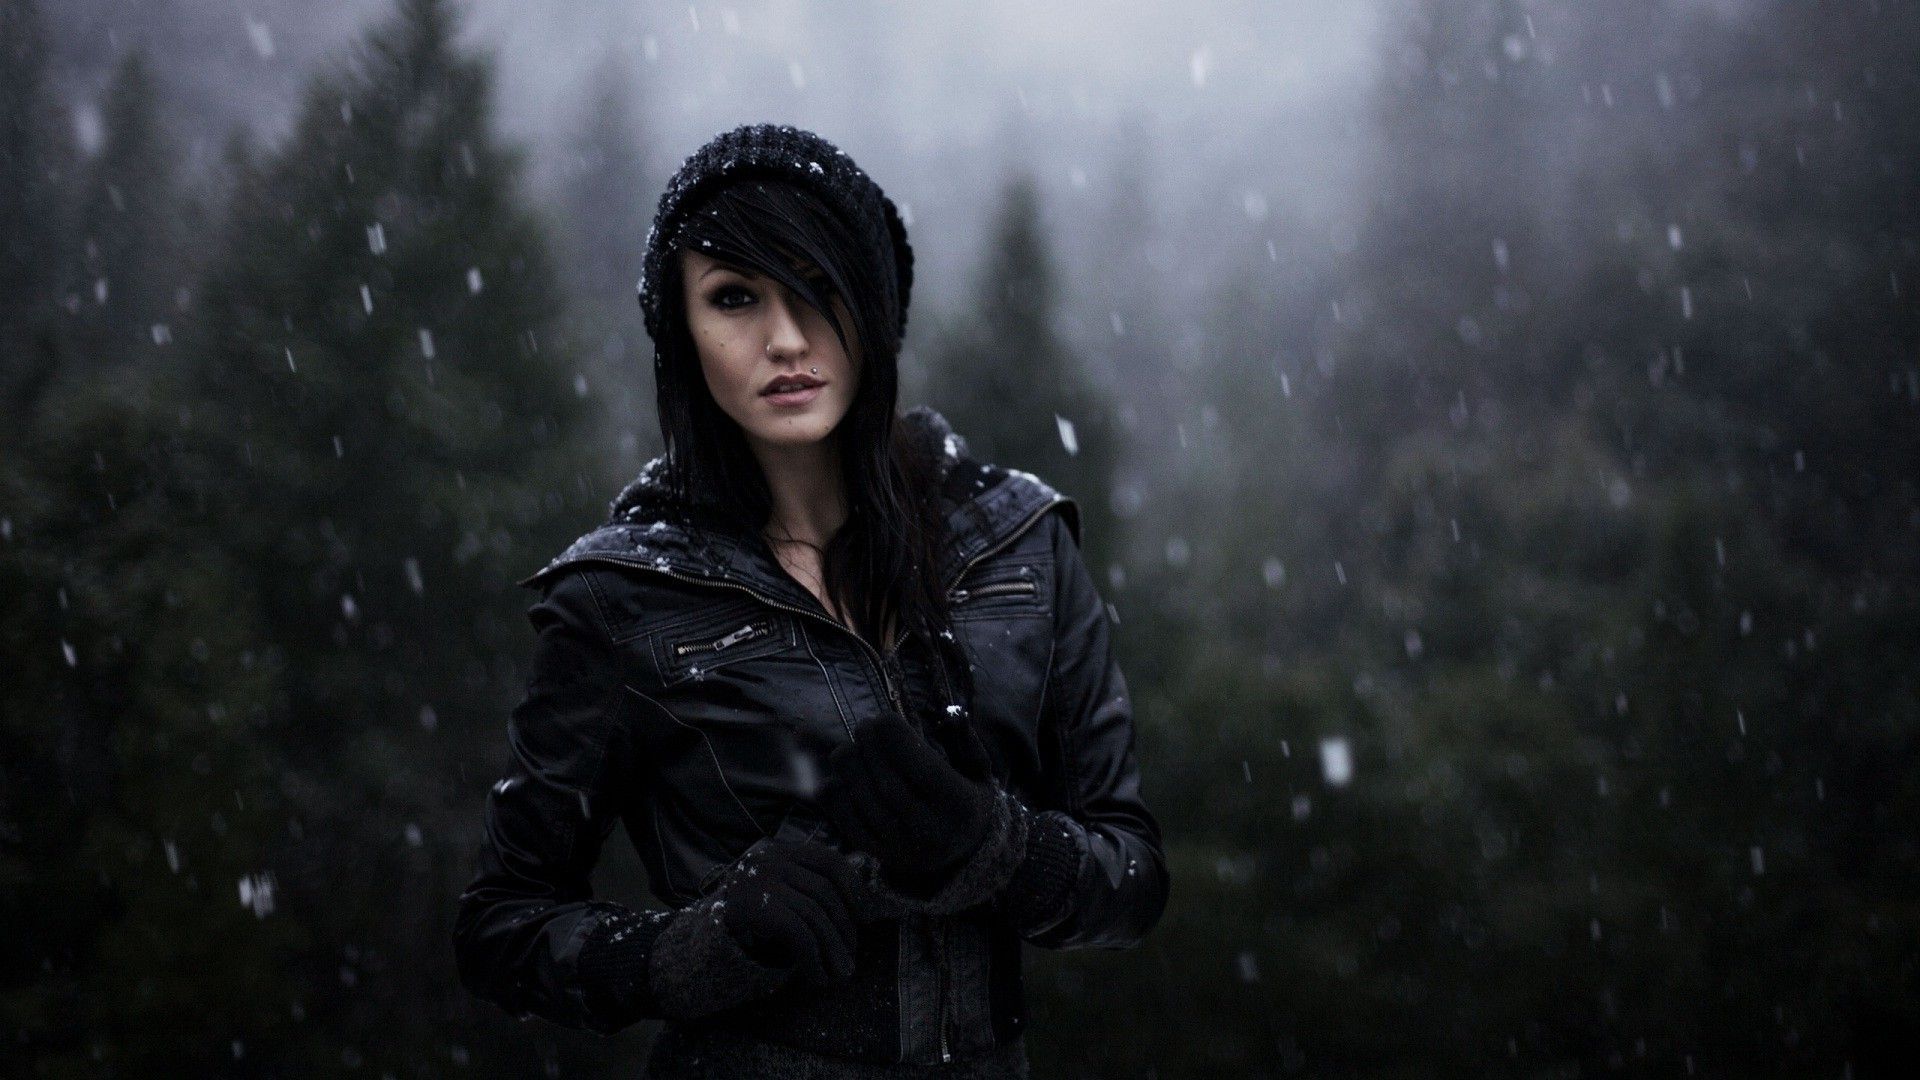 winter, Women, Piercing, Emo, Black Hair, Nature, Depth Of Field, Snow, Forest, Face, Leather Jackets, Gloves Wallpaper HD / Desktop and Mobile Background